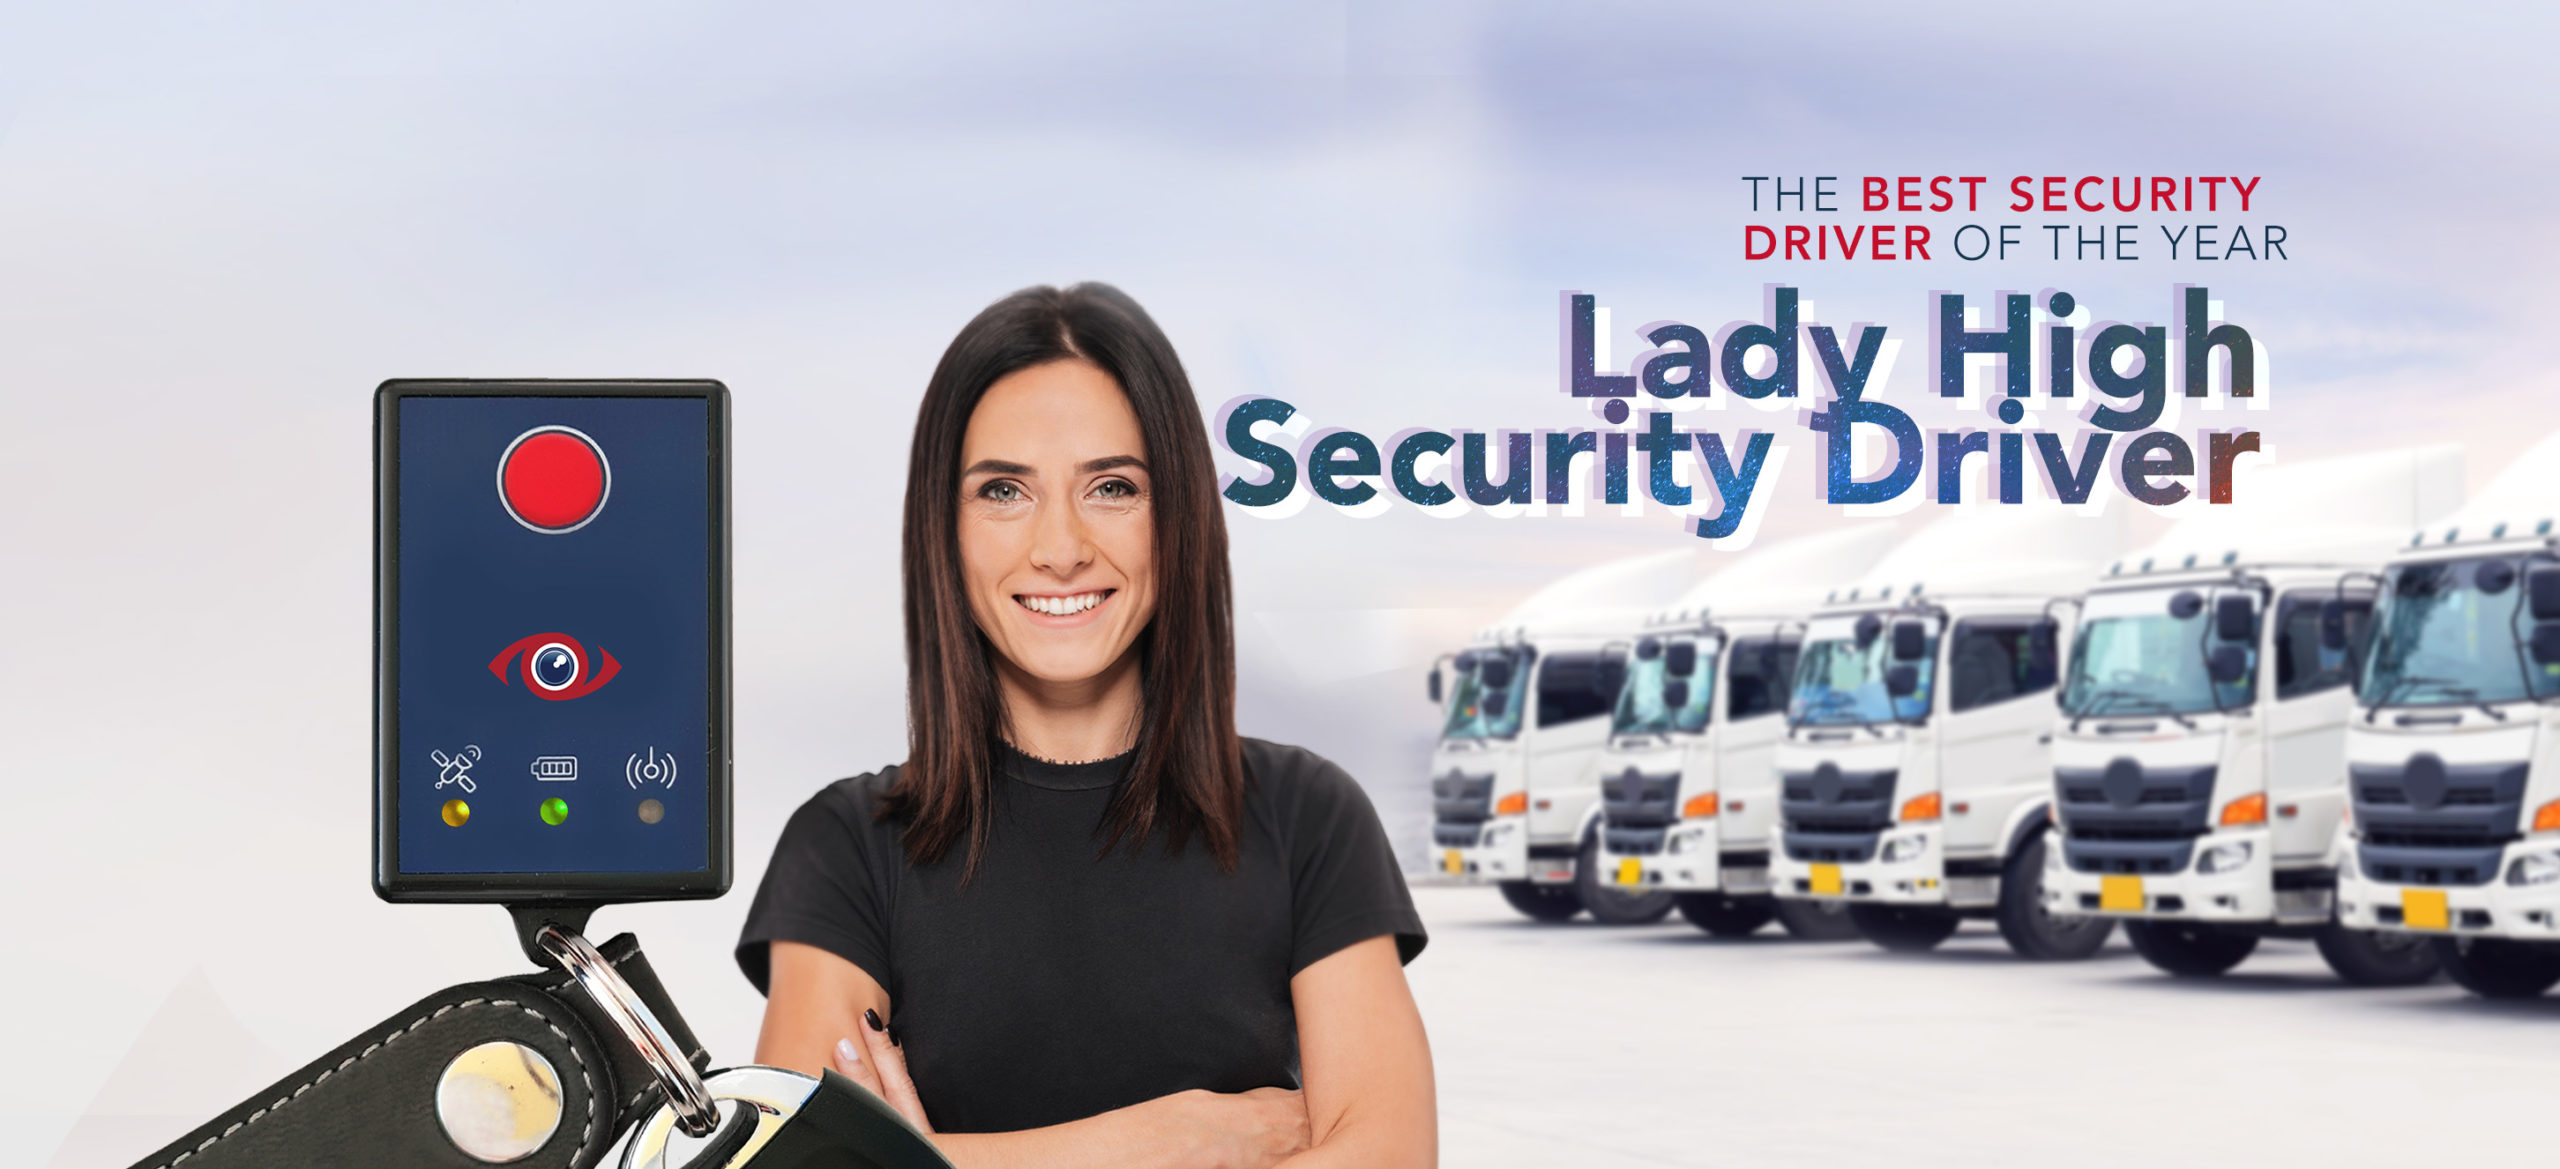 “MULTIPROTEXION LADY HIGH SECURITY DRIVER”: SAVE THE DATE!